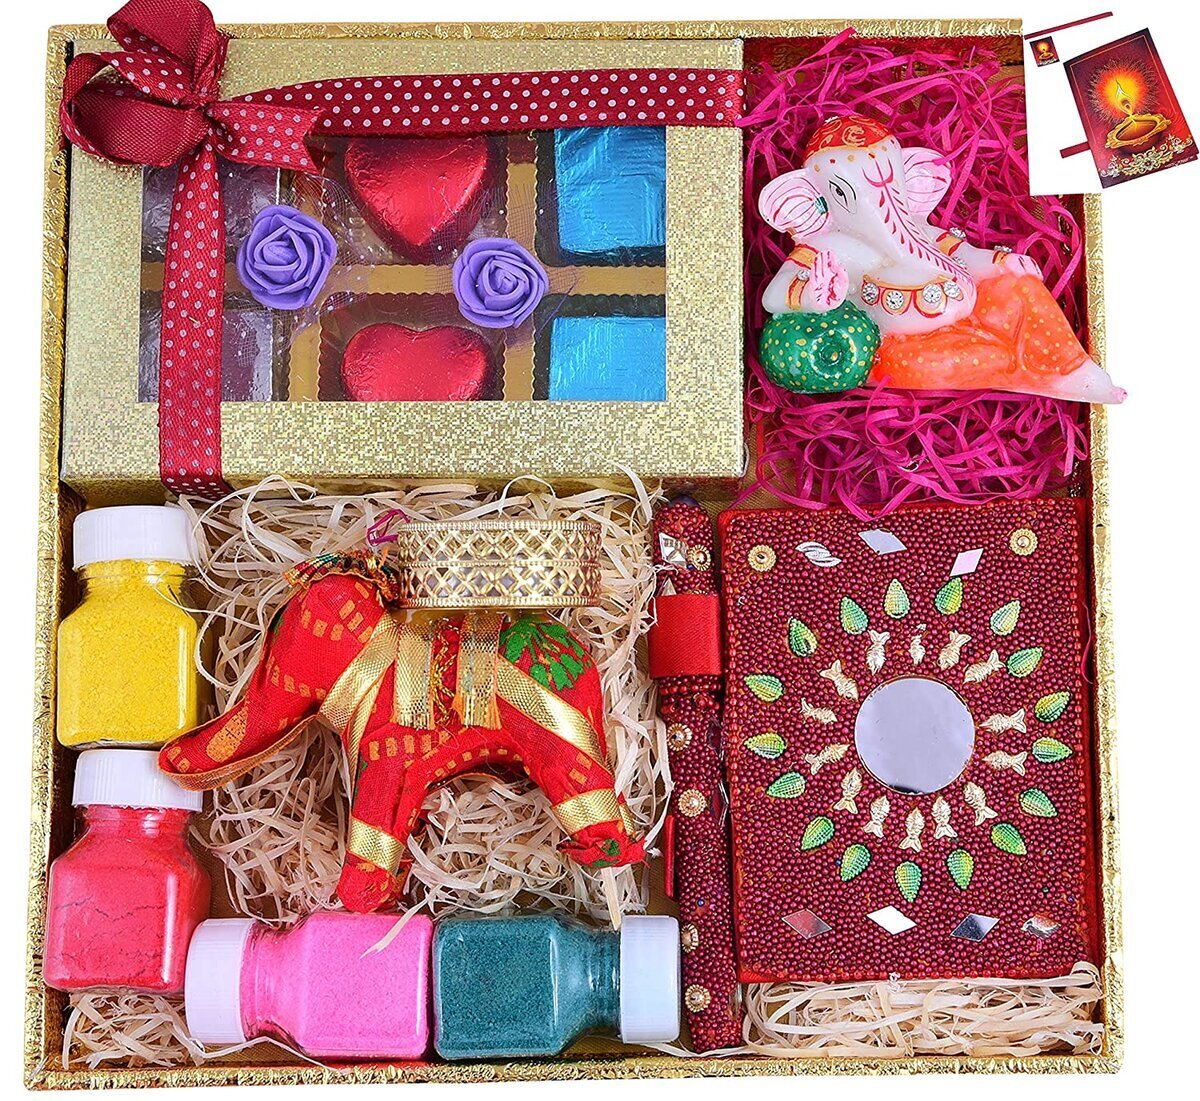 Buy Midiron Handmade Chocolate Gift Hamper| Romantic Gift for Girlfriend,  Wife, Husband, Boyfriend| Special Gift for Valentine's Day, Birthday,  Anniversary and any Special Occasion (Chocolate Box, Teddy, Copuple Ring)  Online at Best